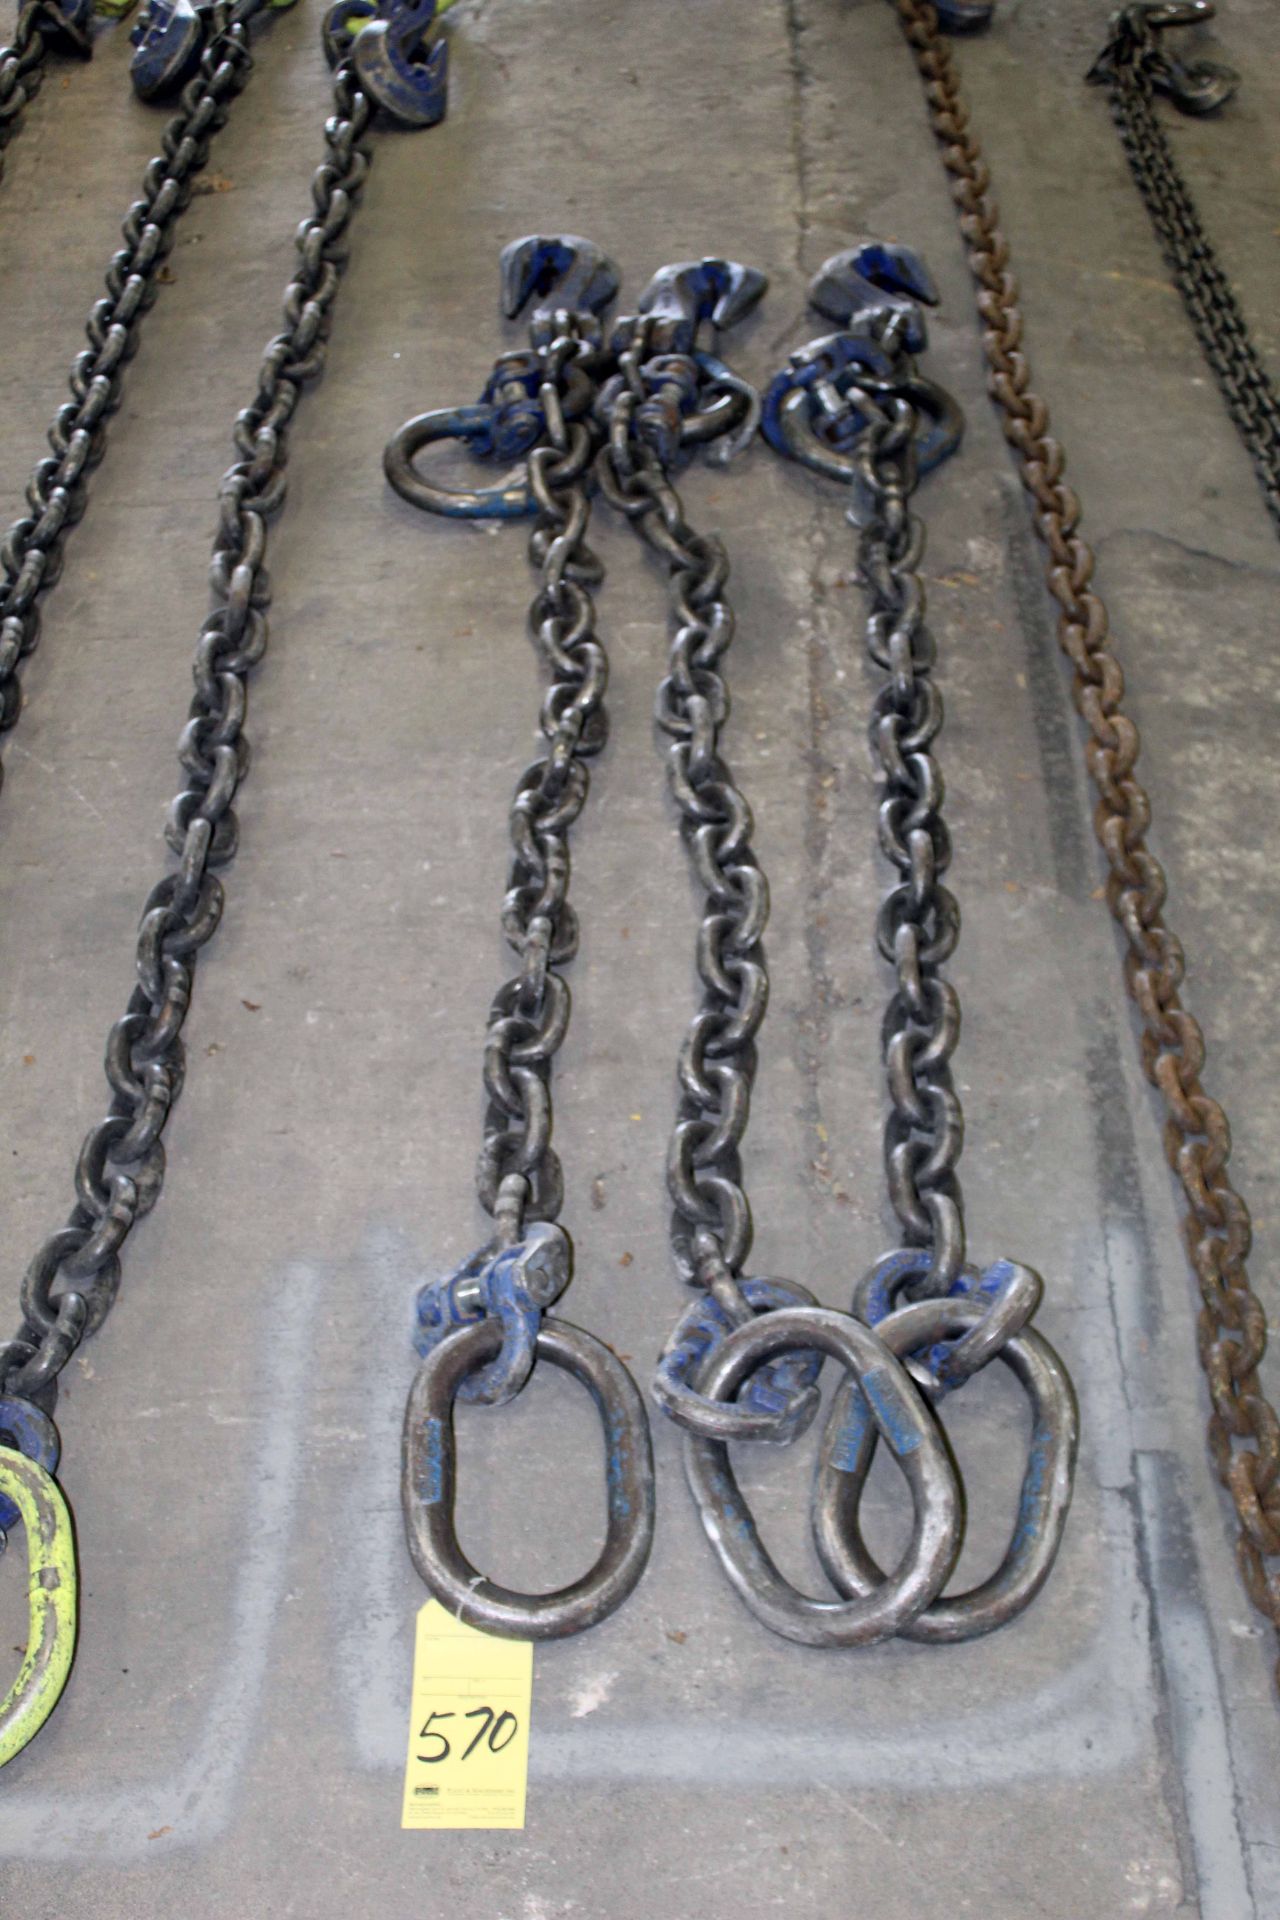 LOT OF RIGGING CHAINS